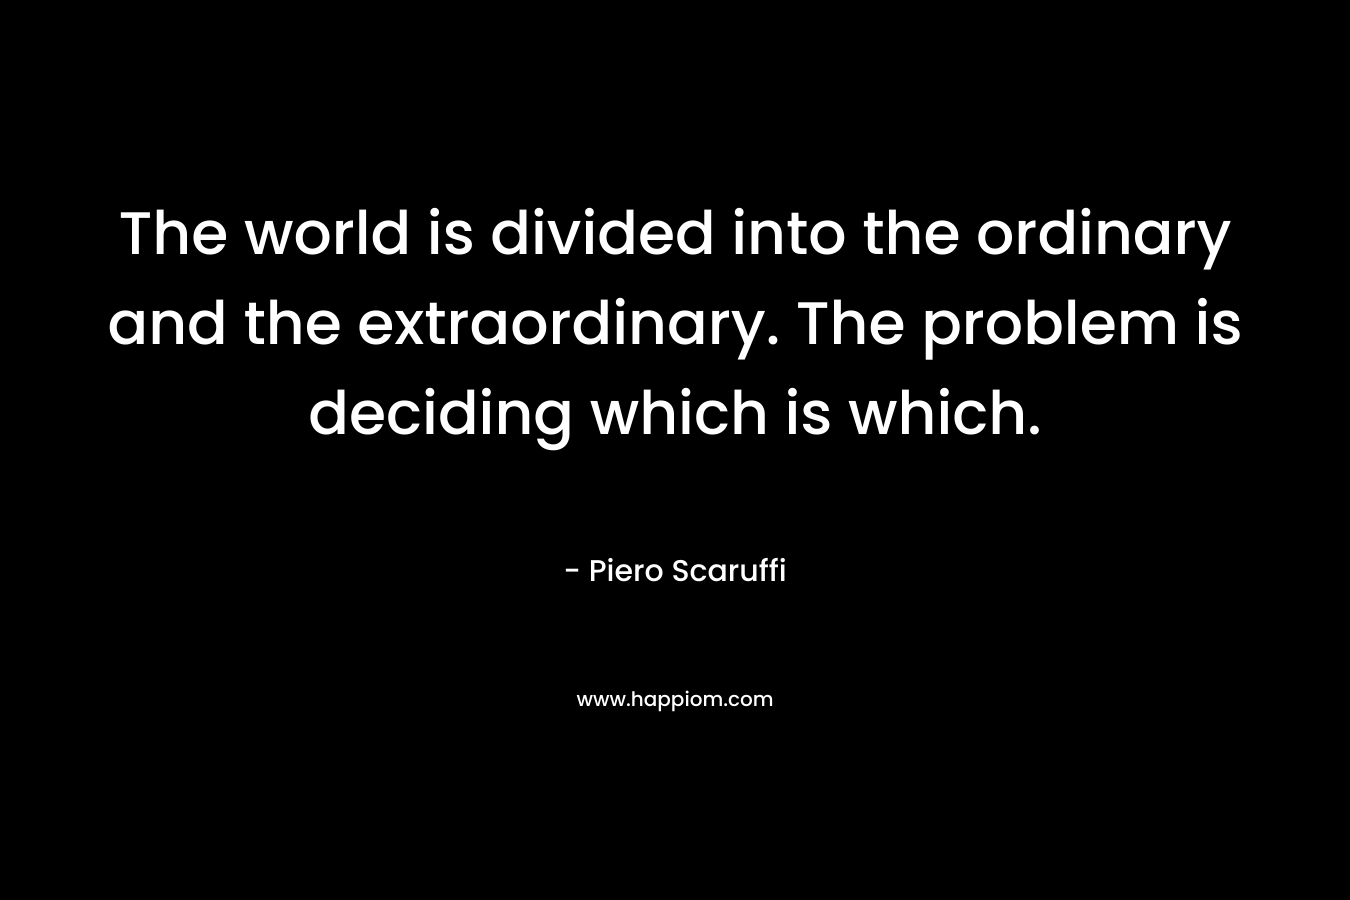 The world is divided into the ordinary and the extraordinary. The problem is deciding which is which.